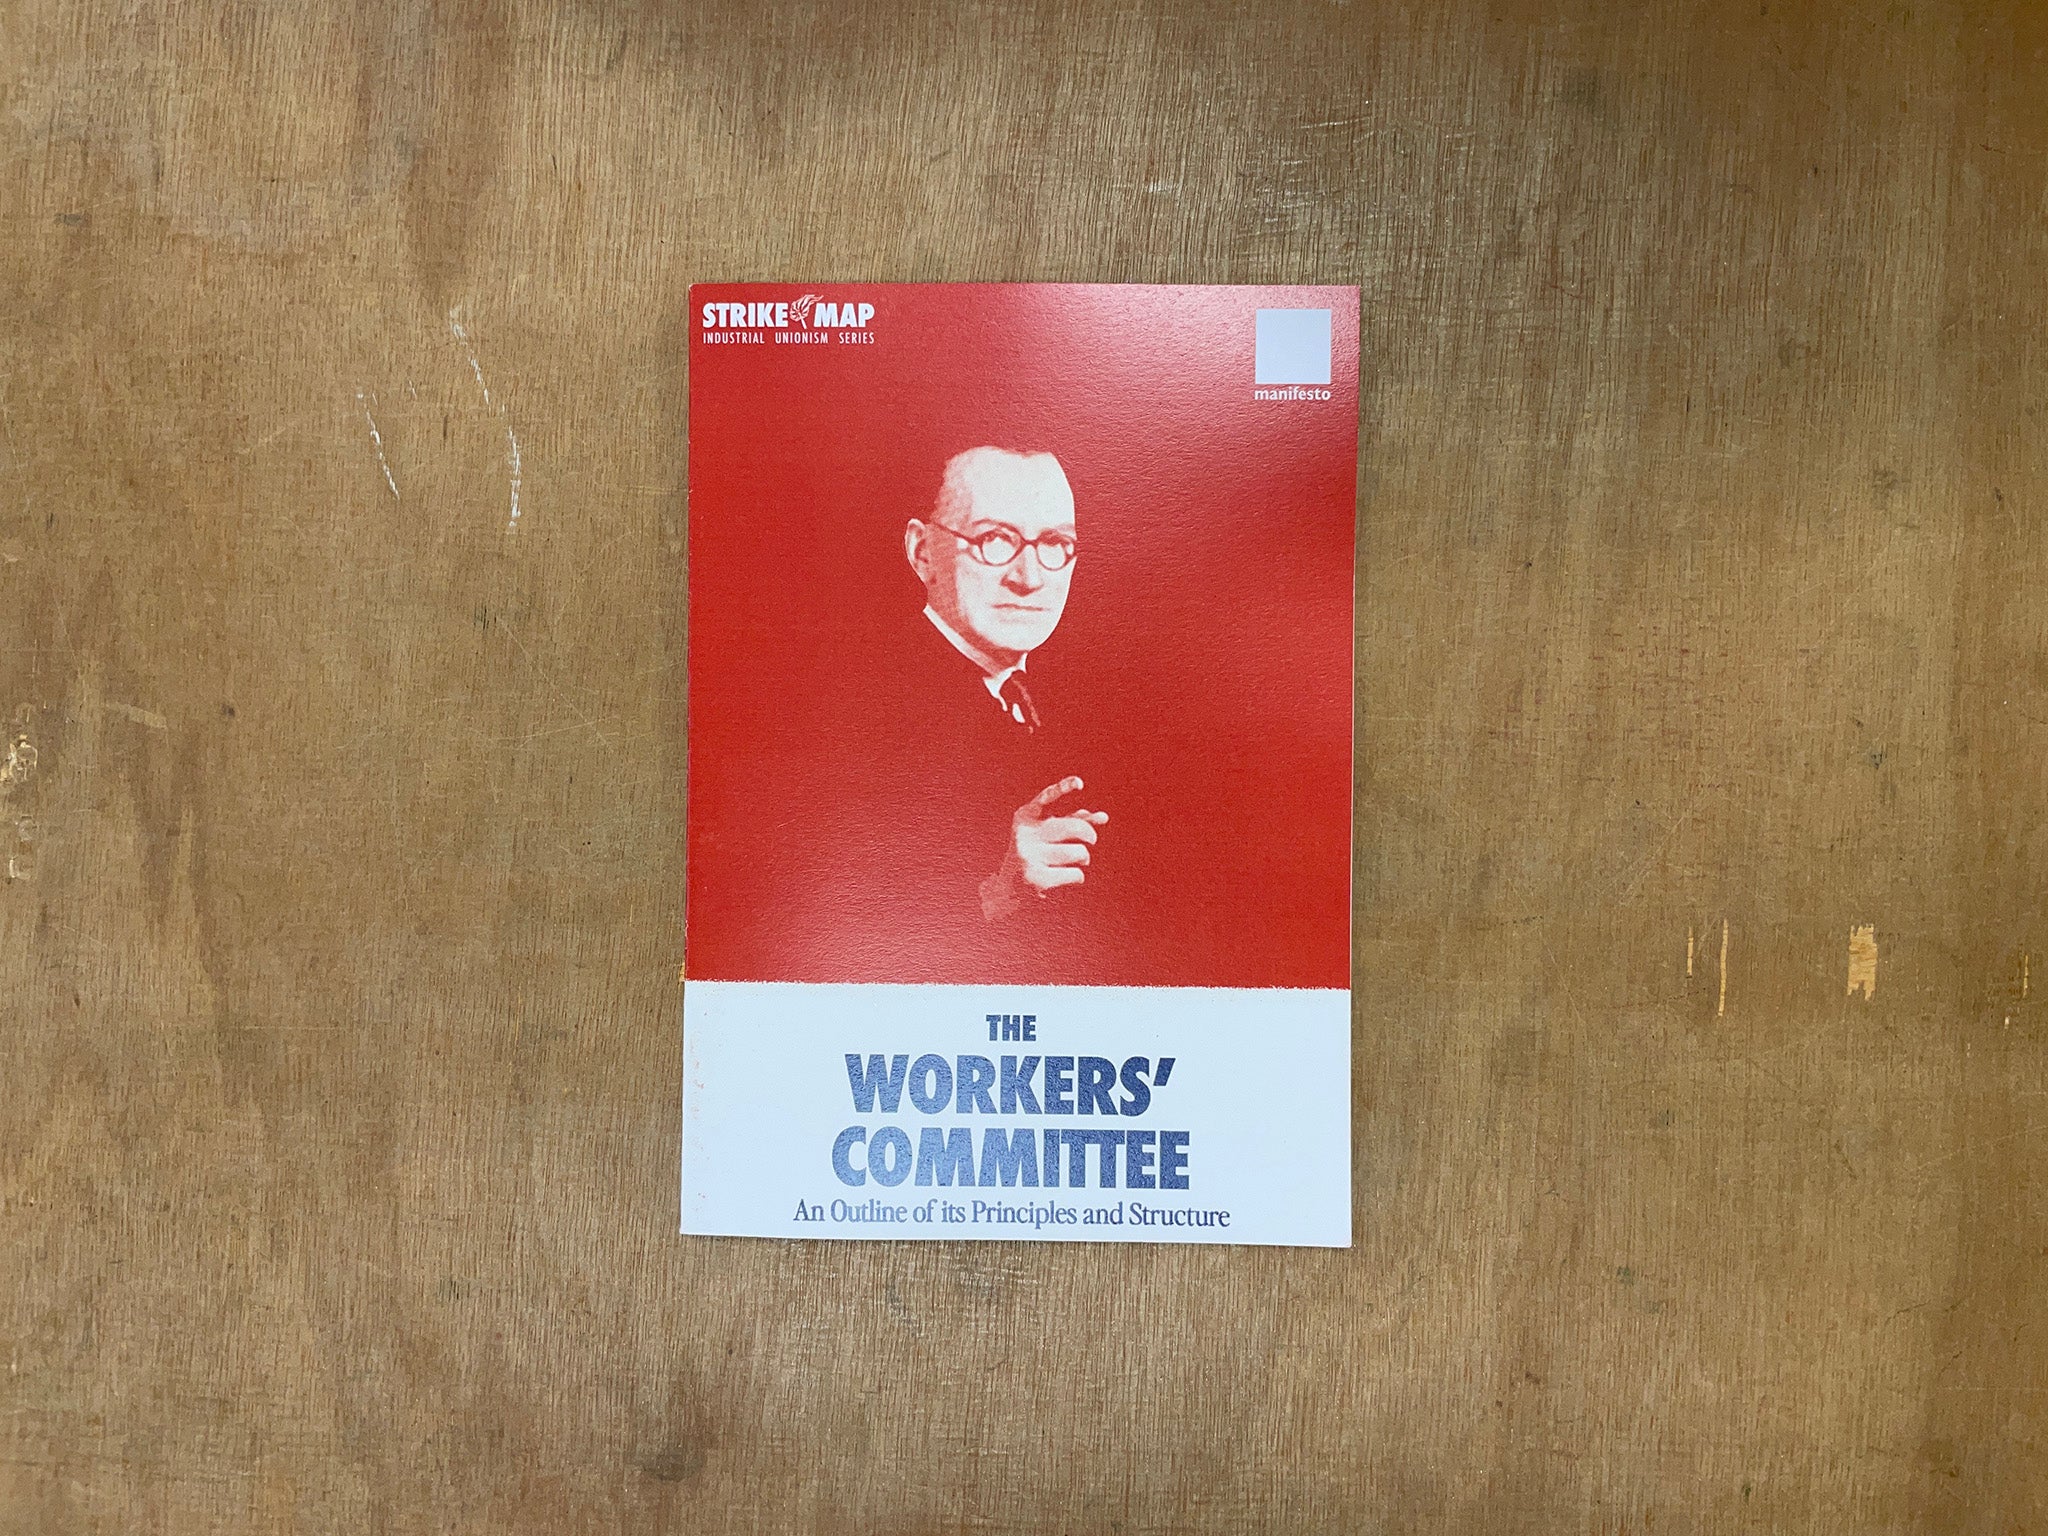 THE WORKERS' COMMITTEE: AN OUTLINE OF ITS PRINCIPLES AND STRUCTURE